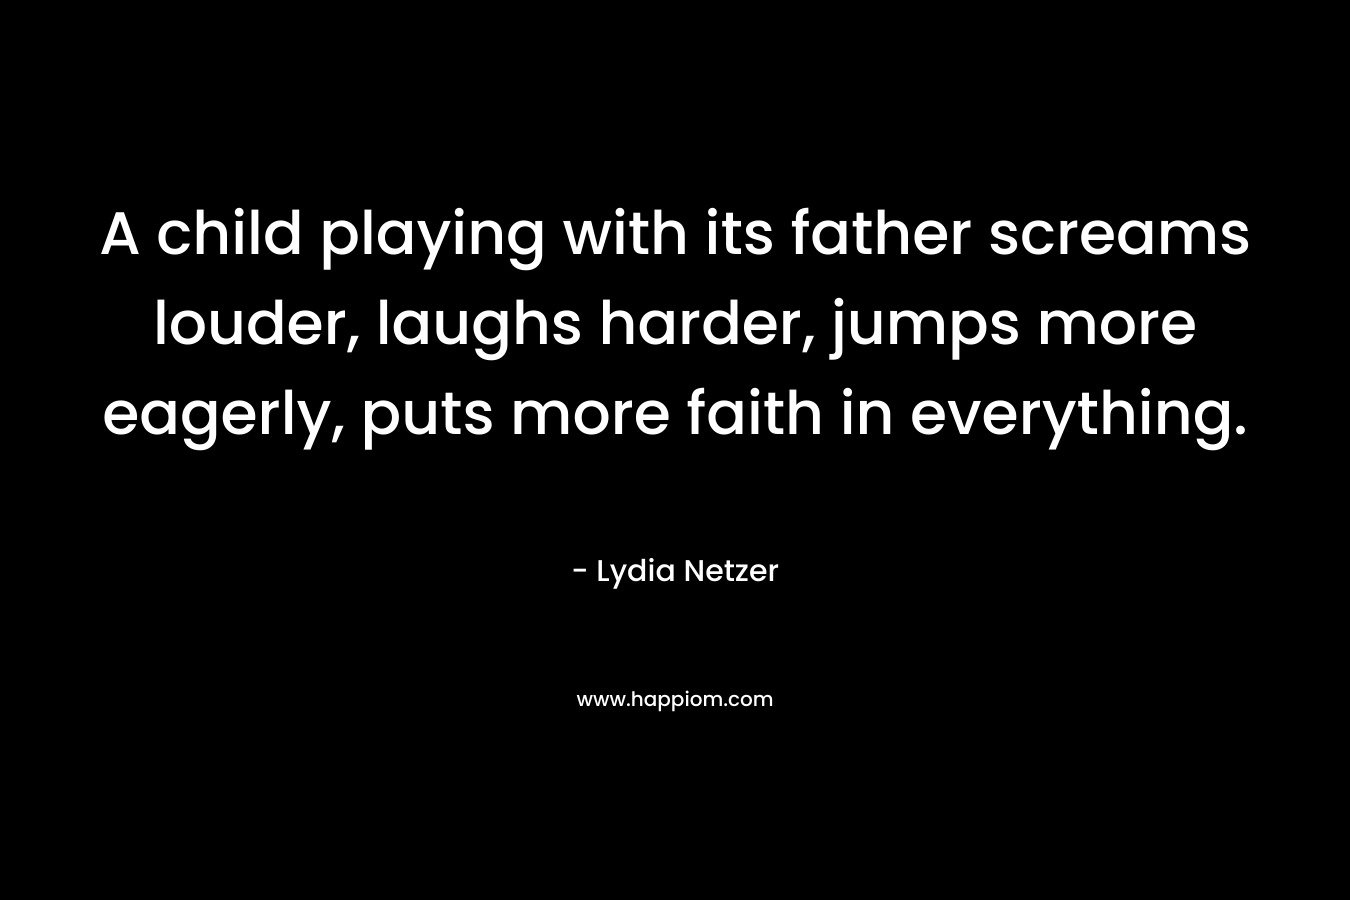 A child playing with its father screams louder, laughs harder, jumps more eagerly, puts more faith in everything. – Lydia Netzer